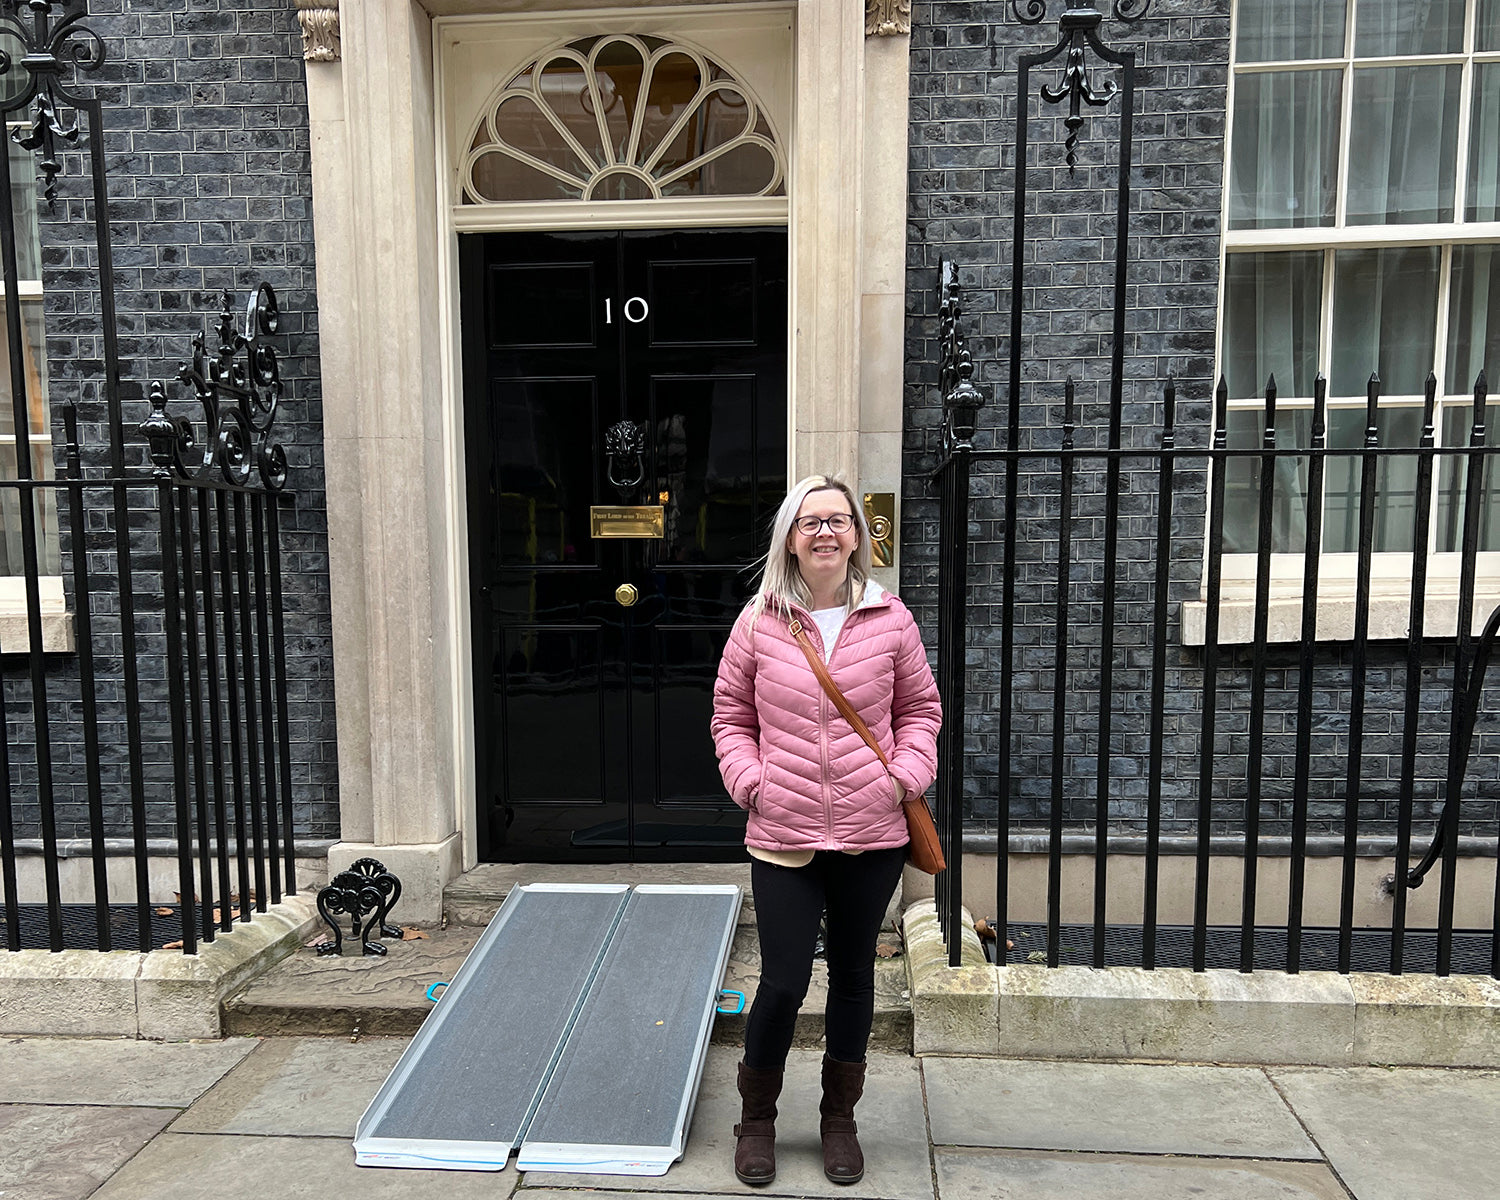 Hayley, a white blonde female, stood outside 10 Downing Street, there is a ramp leading up to the front door. Hayley is smiling at the camera.